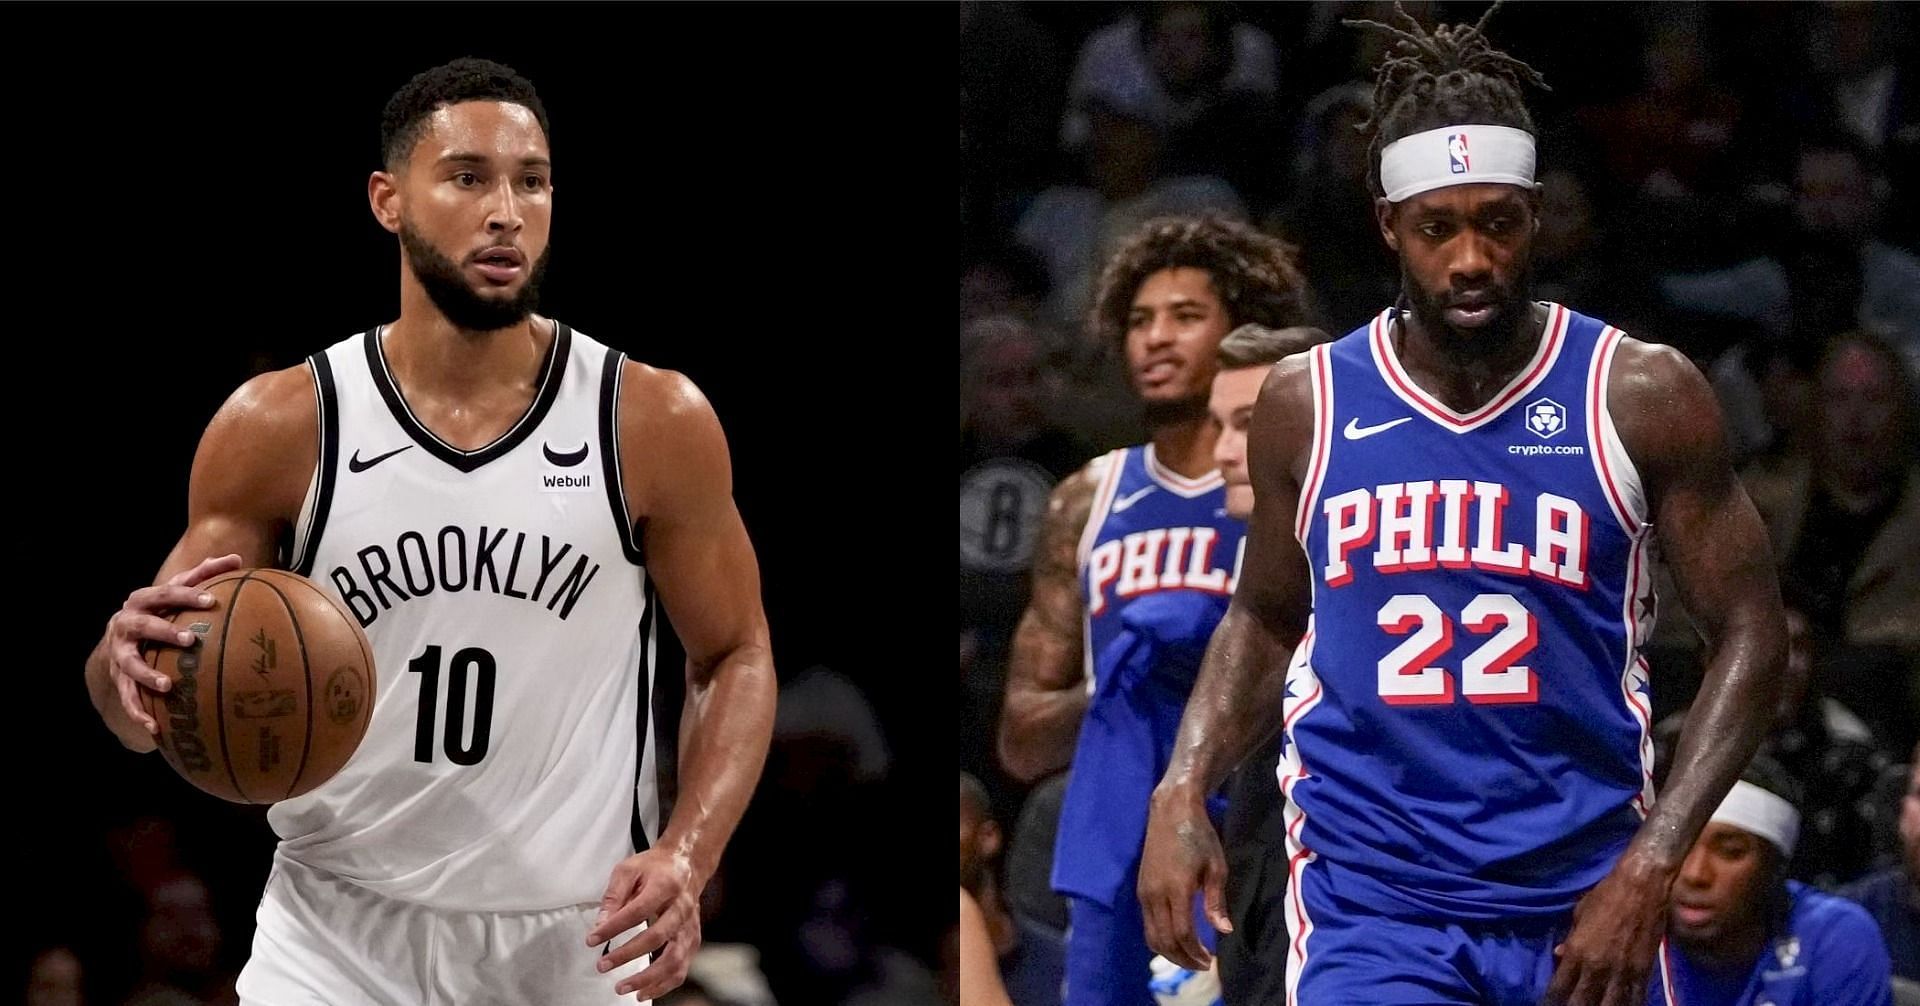 Brooklyn Nets point guard Ben Simmons and Philadelphia 76ers point guard Patrick Beverley